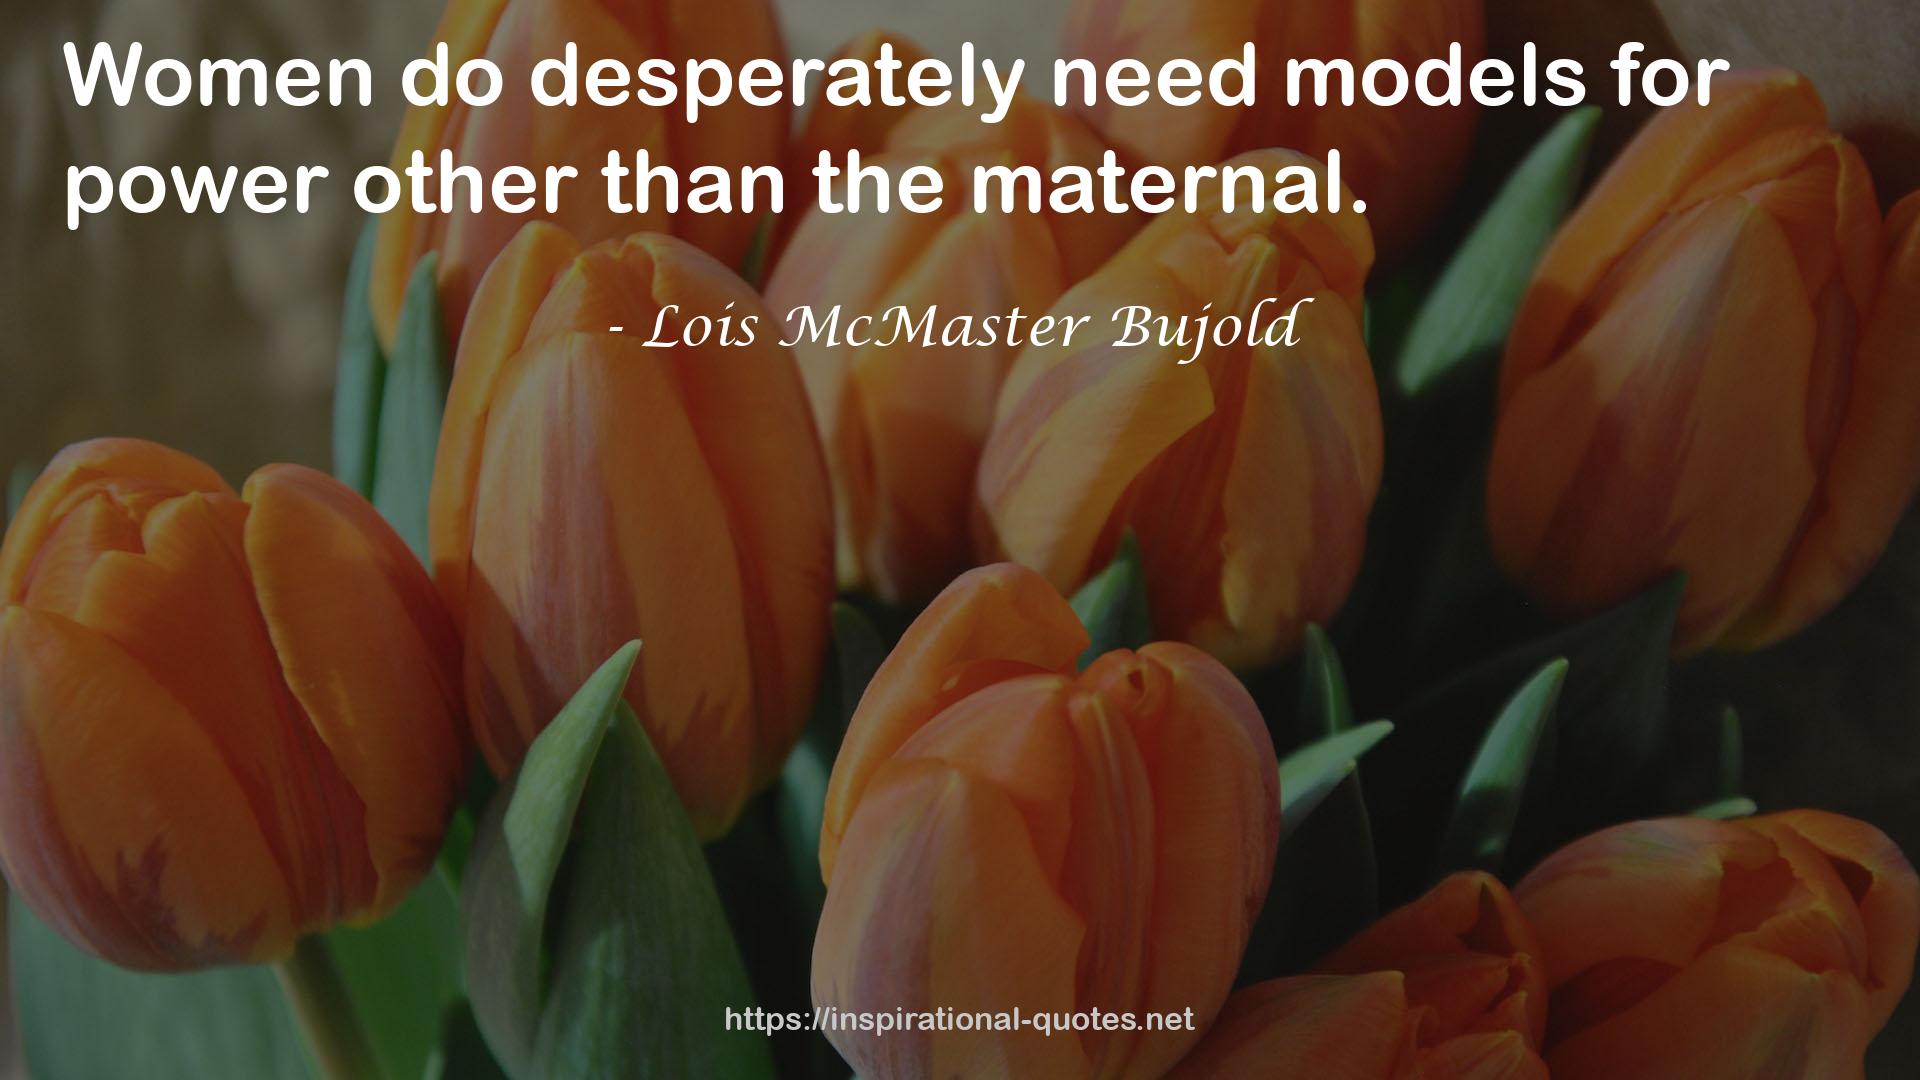 Lois McMaster Bujold QUOTES